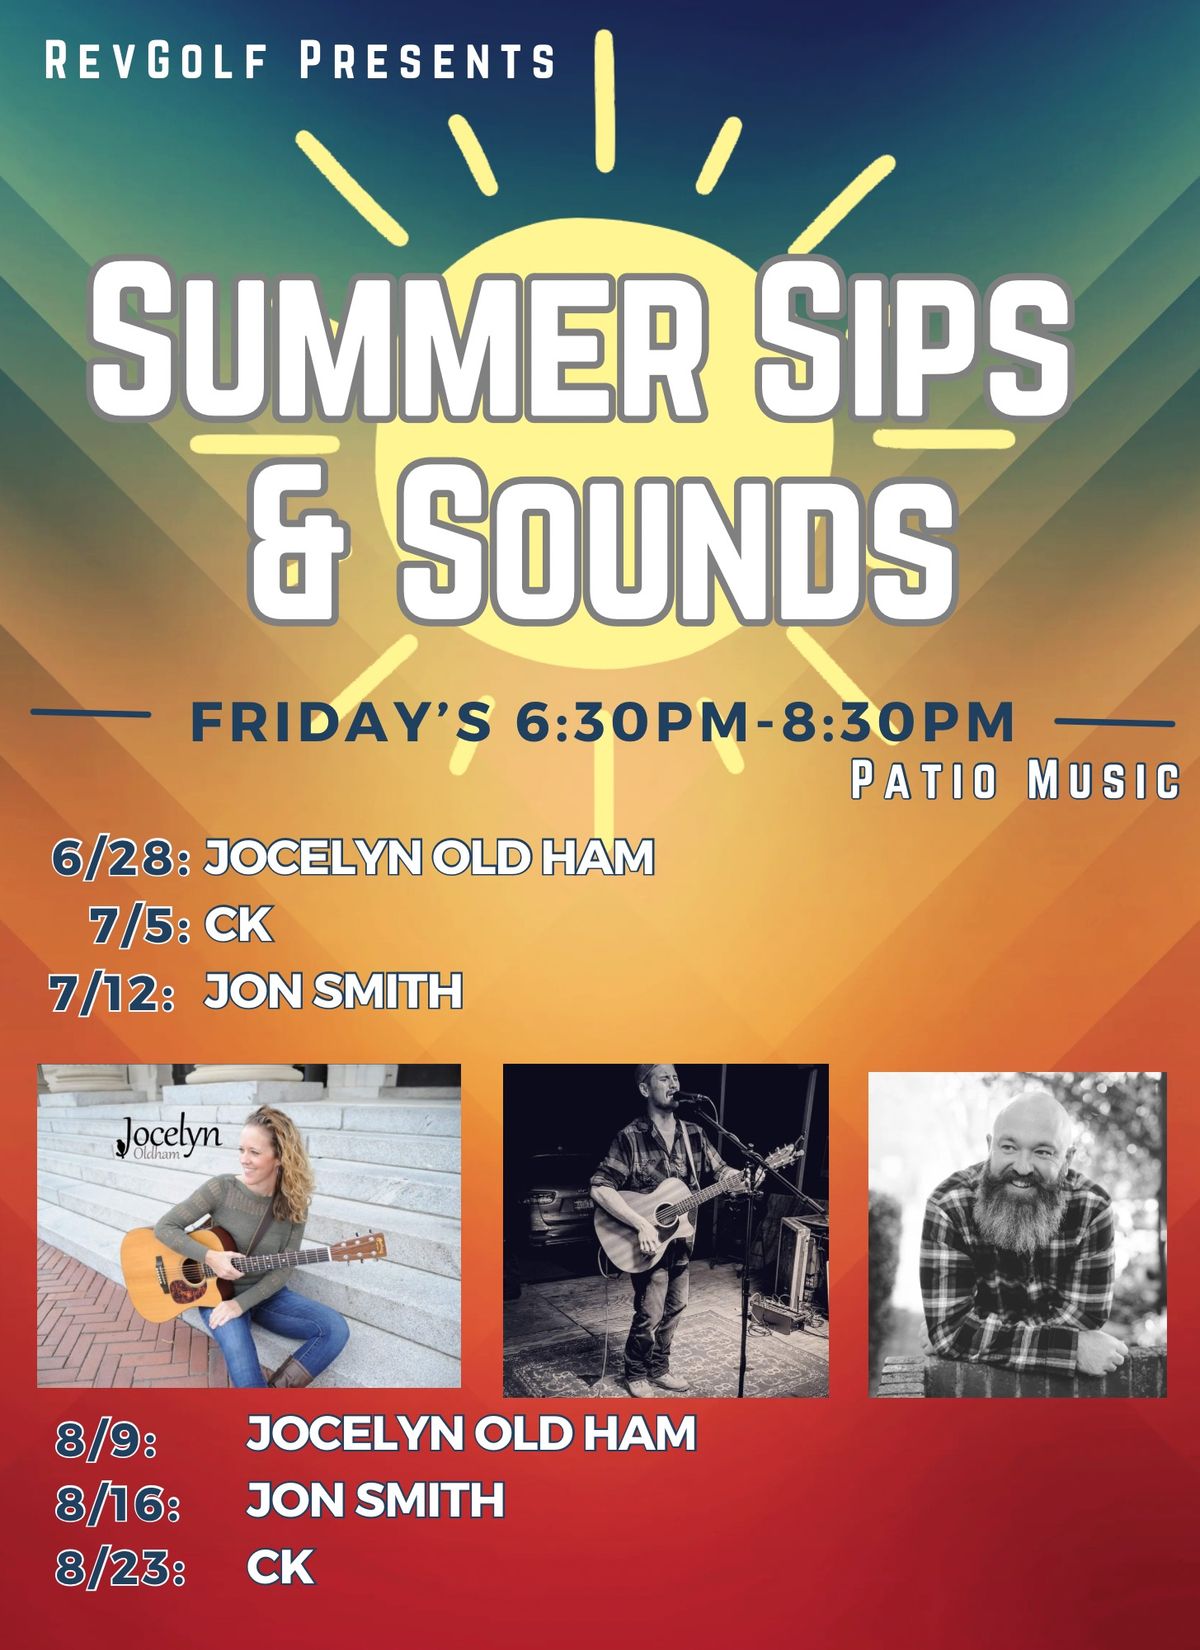 Live Music on the Patio with Jon Smith